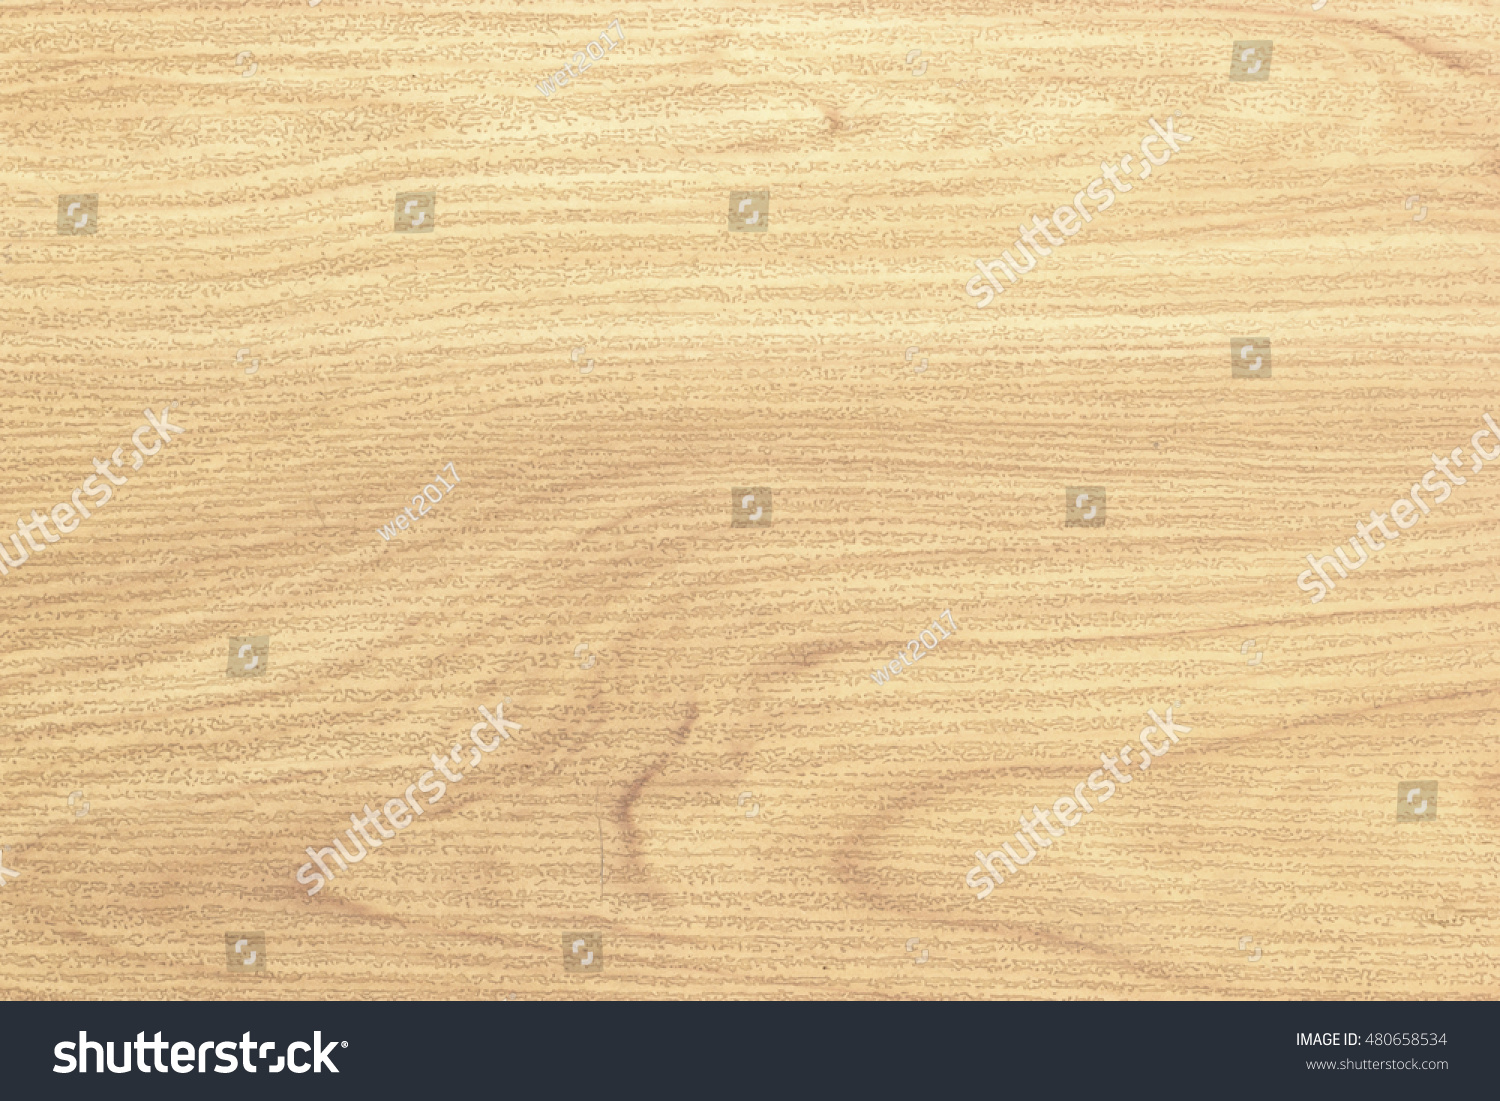 Hardwood maple basketball court floor viewed from above #480658534